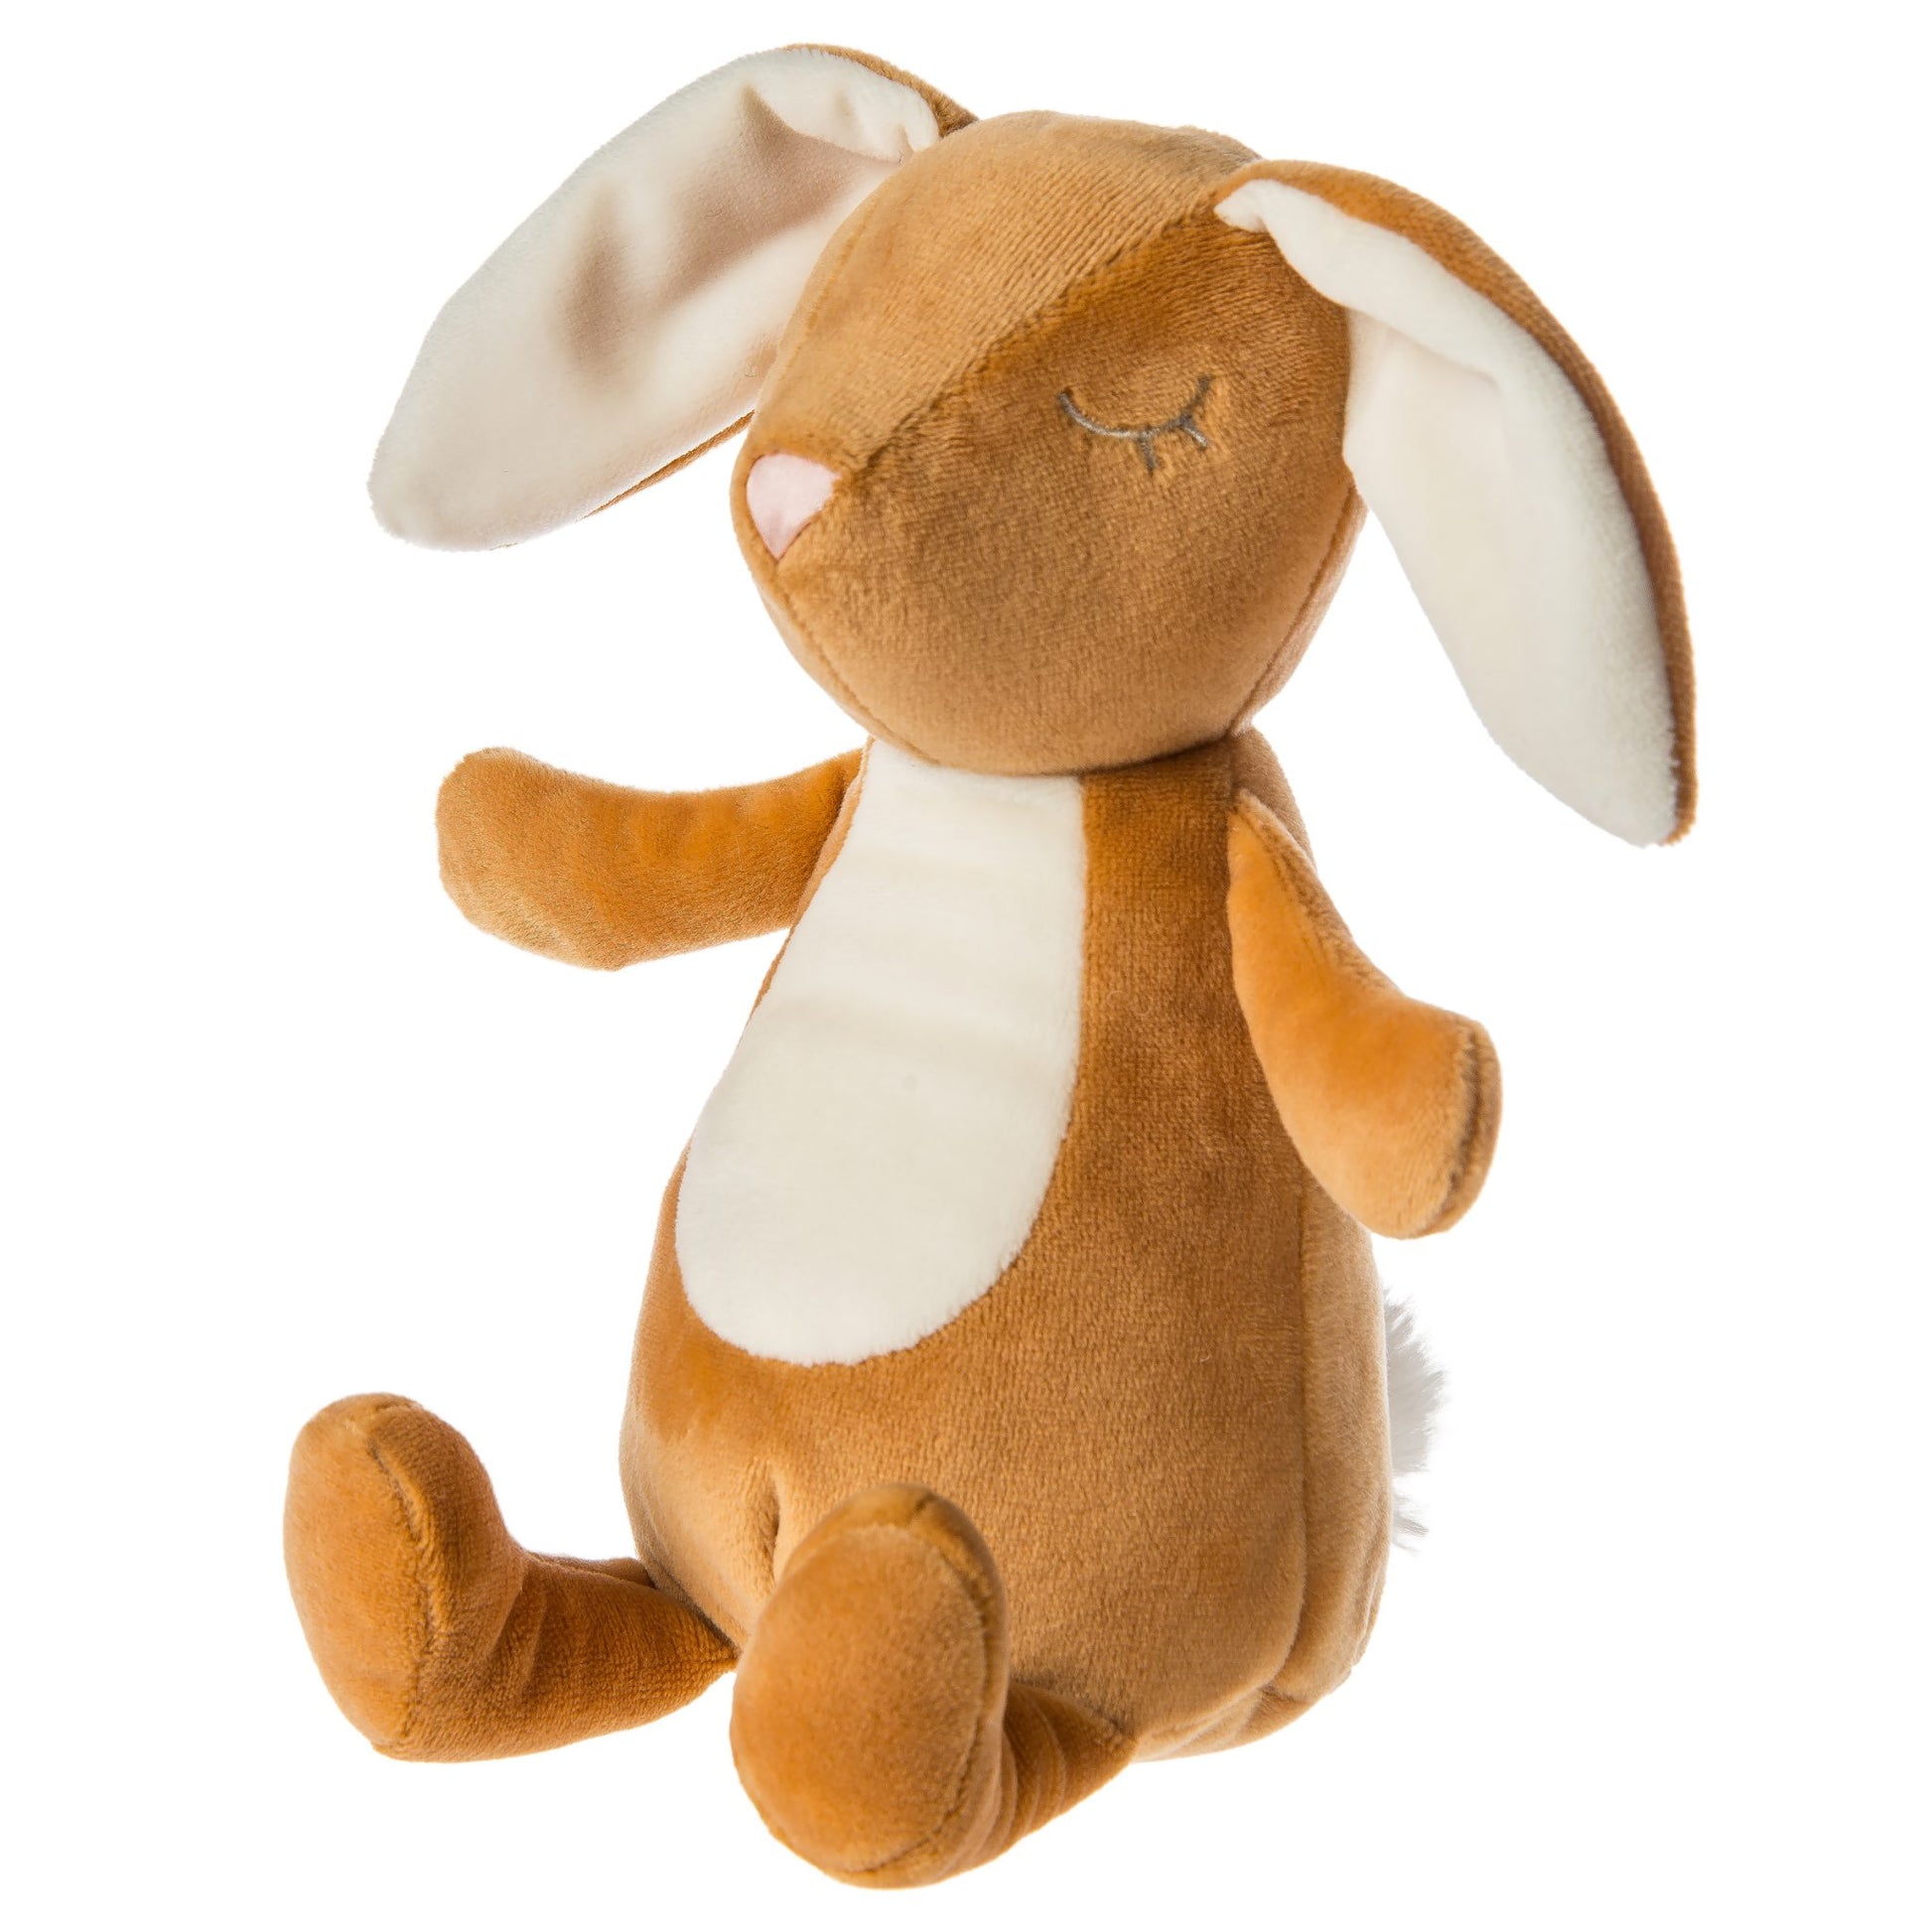 leika little bunny soft toy on a white background